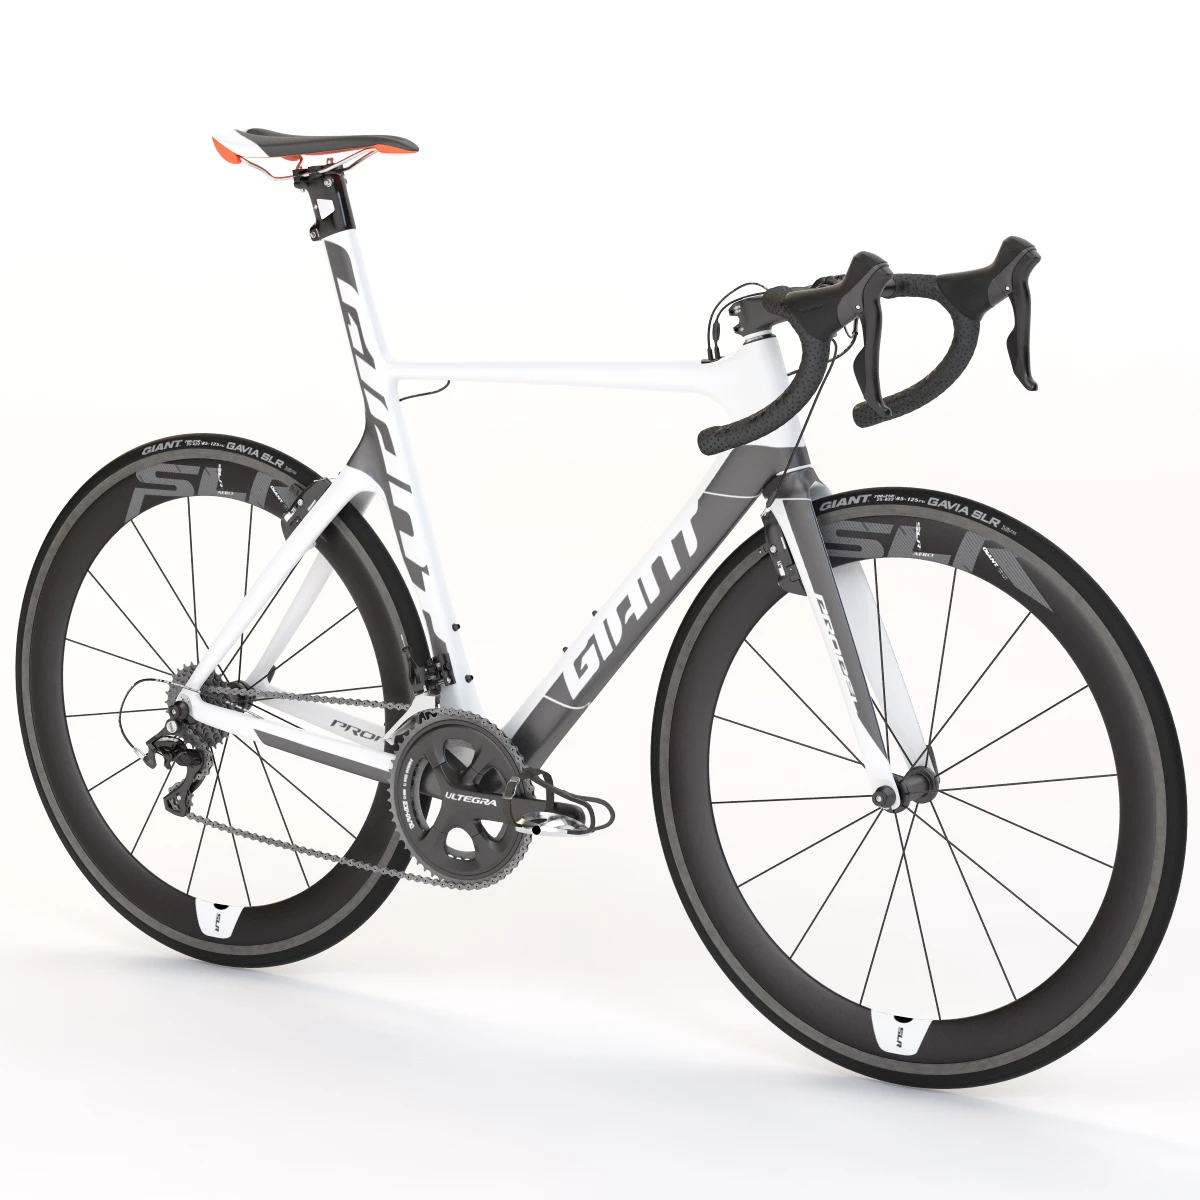 Giant Propel Advanced SL-2 White Ash Lightweight Sprinter Bicycle 3D Model_01